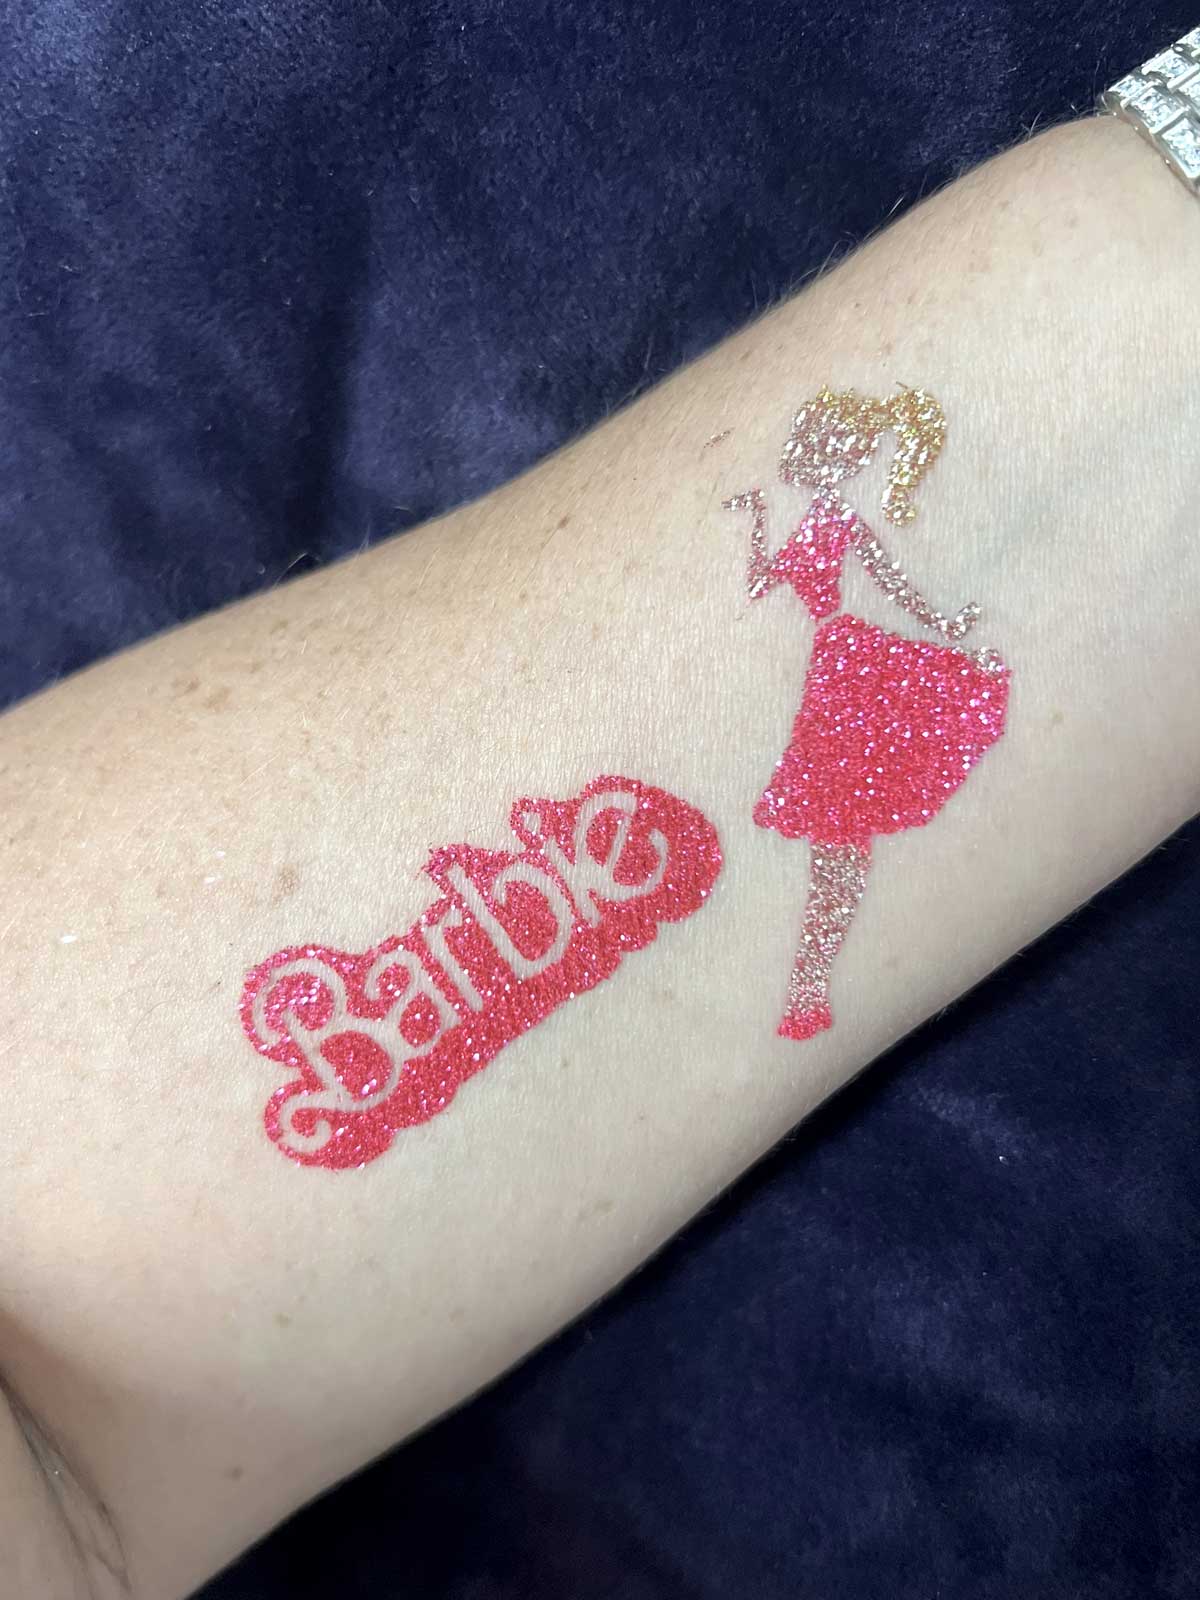 A sparkly pink temporary tattoo of the barbie logo and a silhouetted figure on a person's arm.